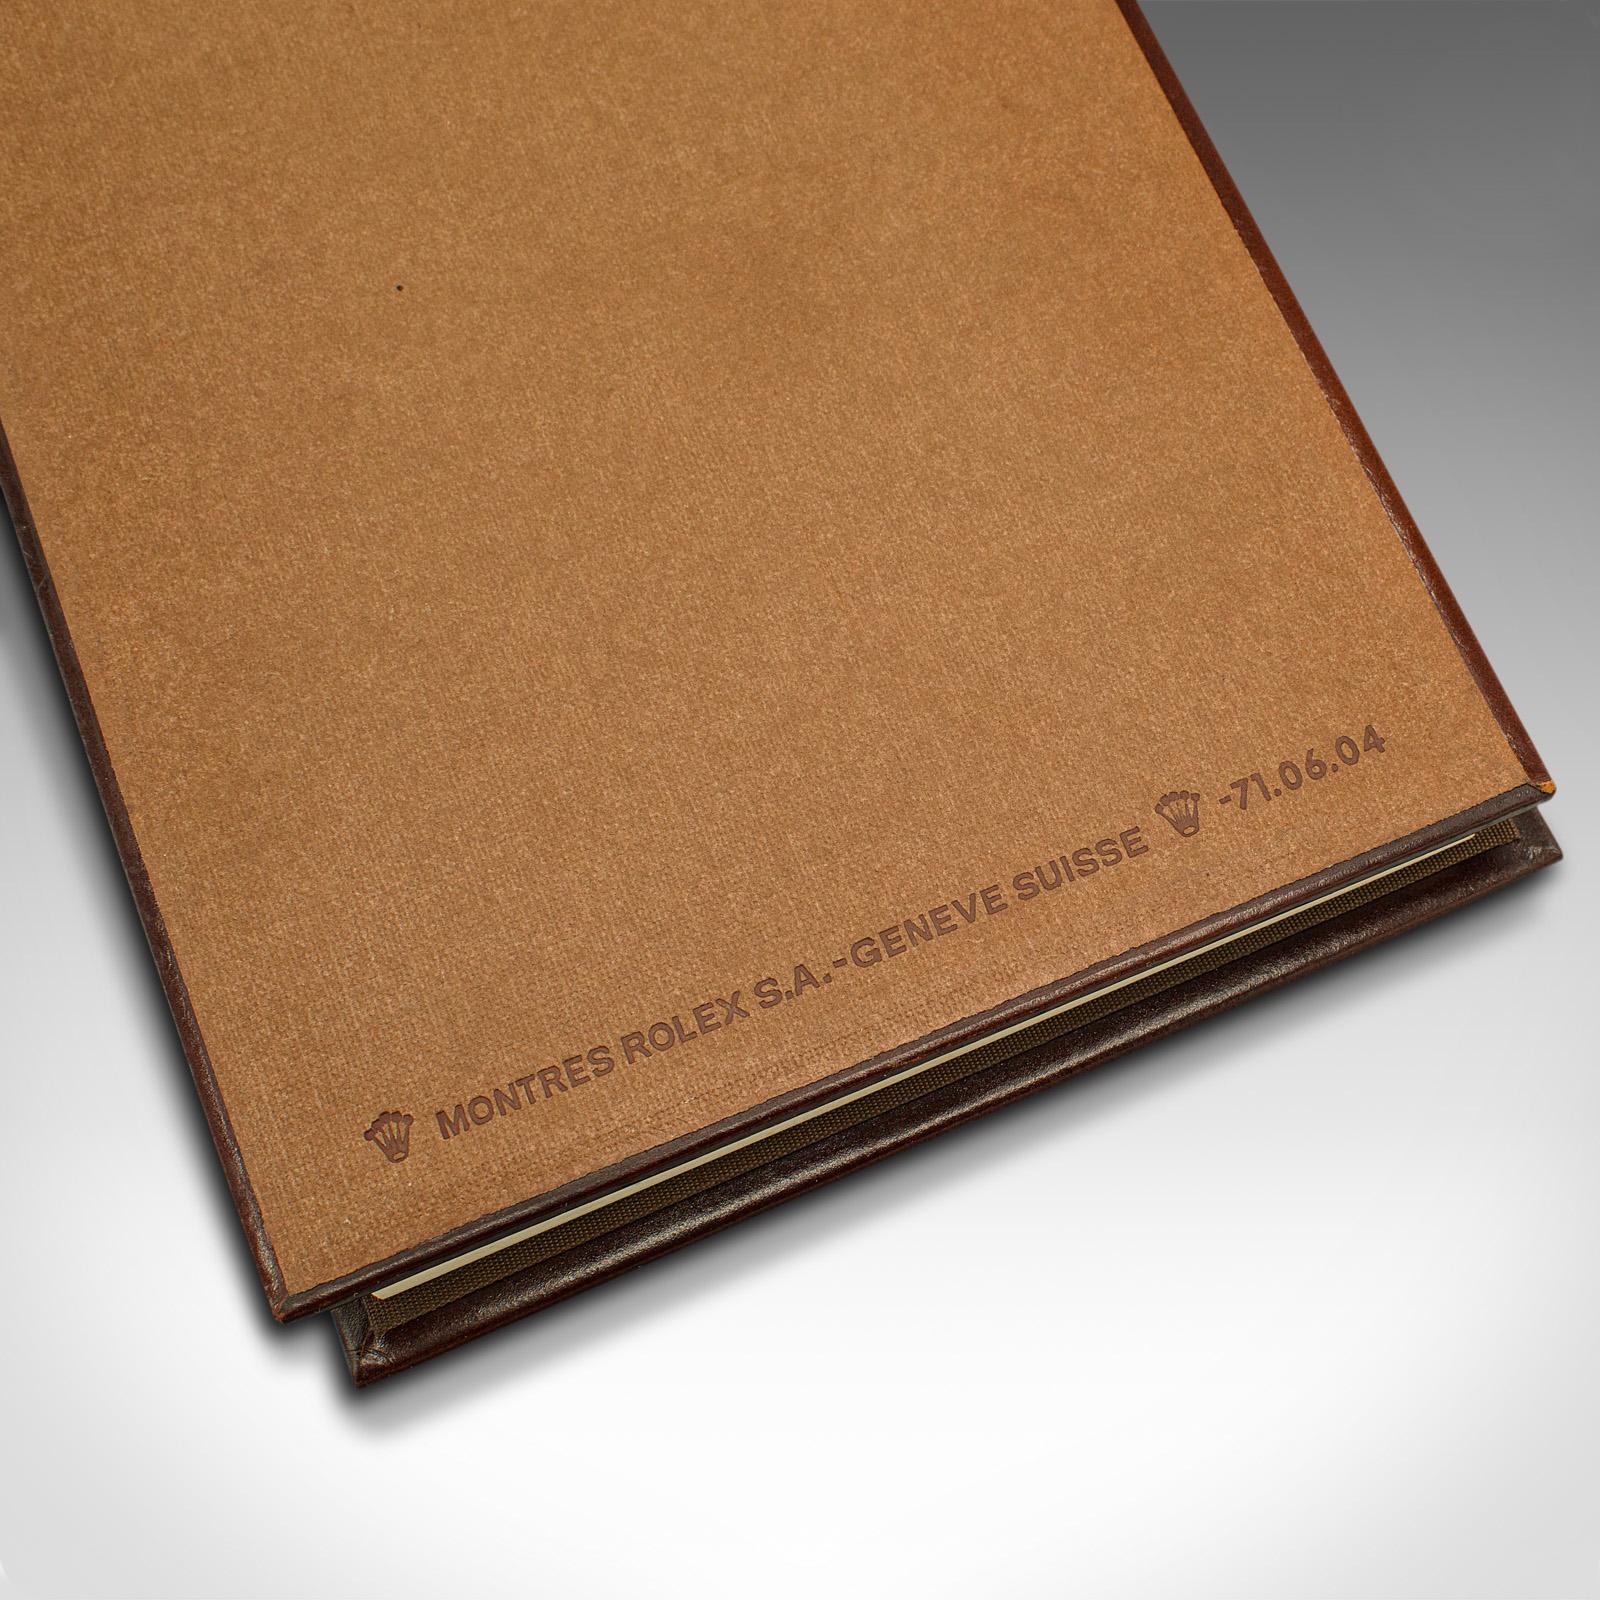 Vintage Rolex Dealer's Quote Pad, Swiss, Leather Bound, Notebook Slip, Late 20th For Sale 1